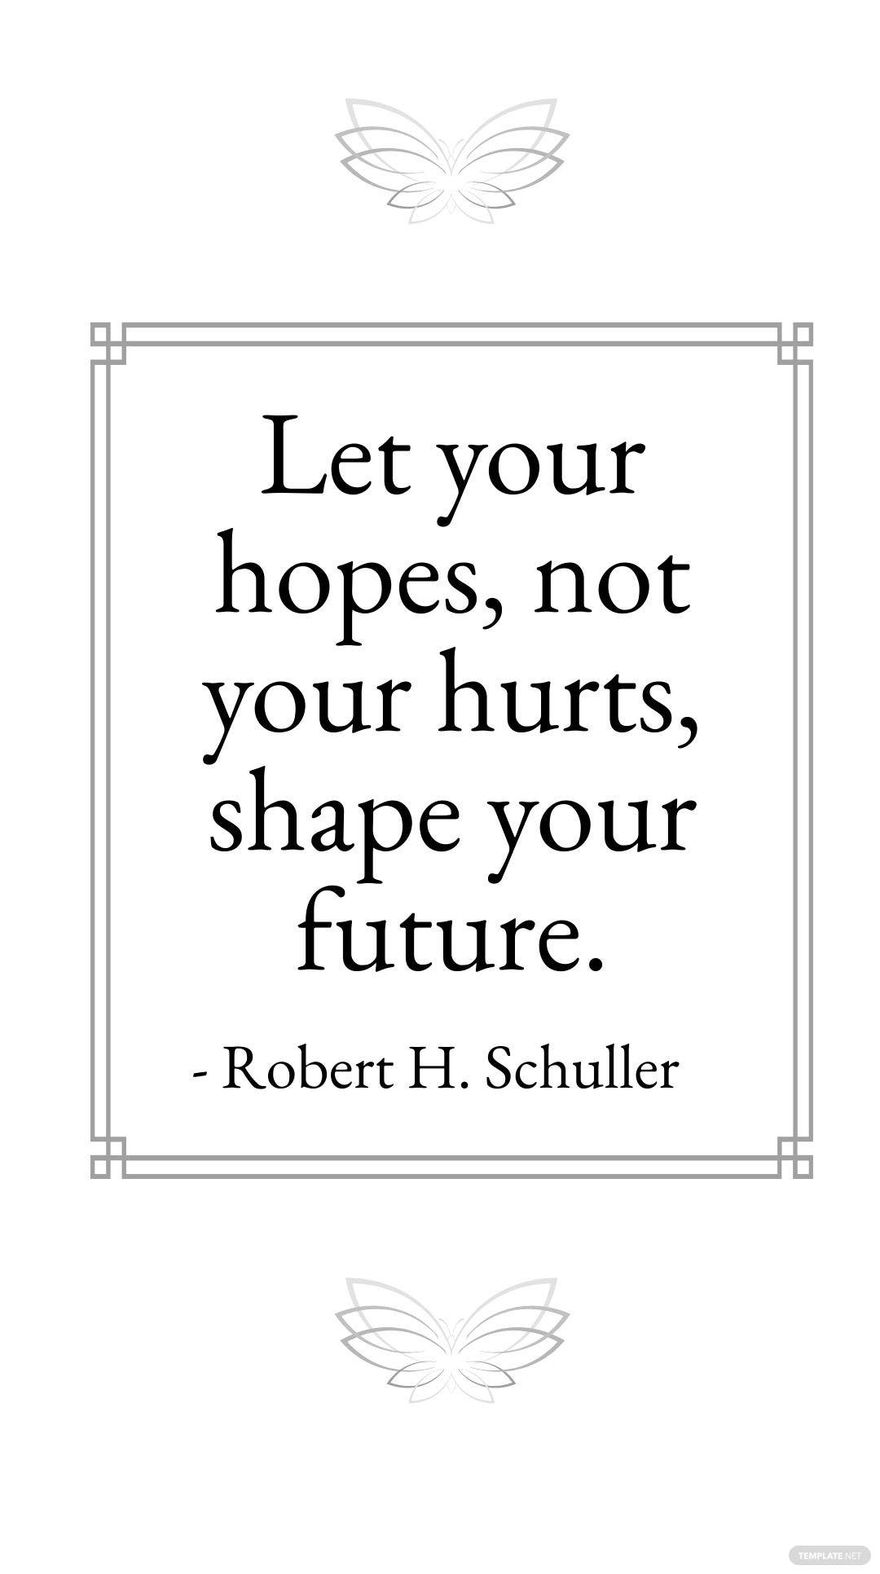 Robert H. Schuller - Let your hopes, not your hurts, shape your future.